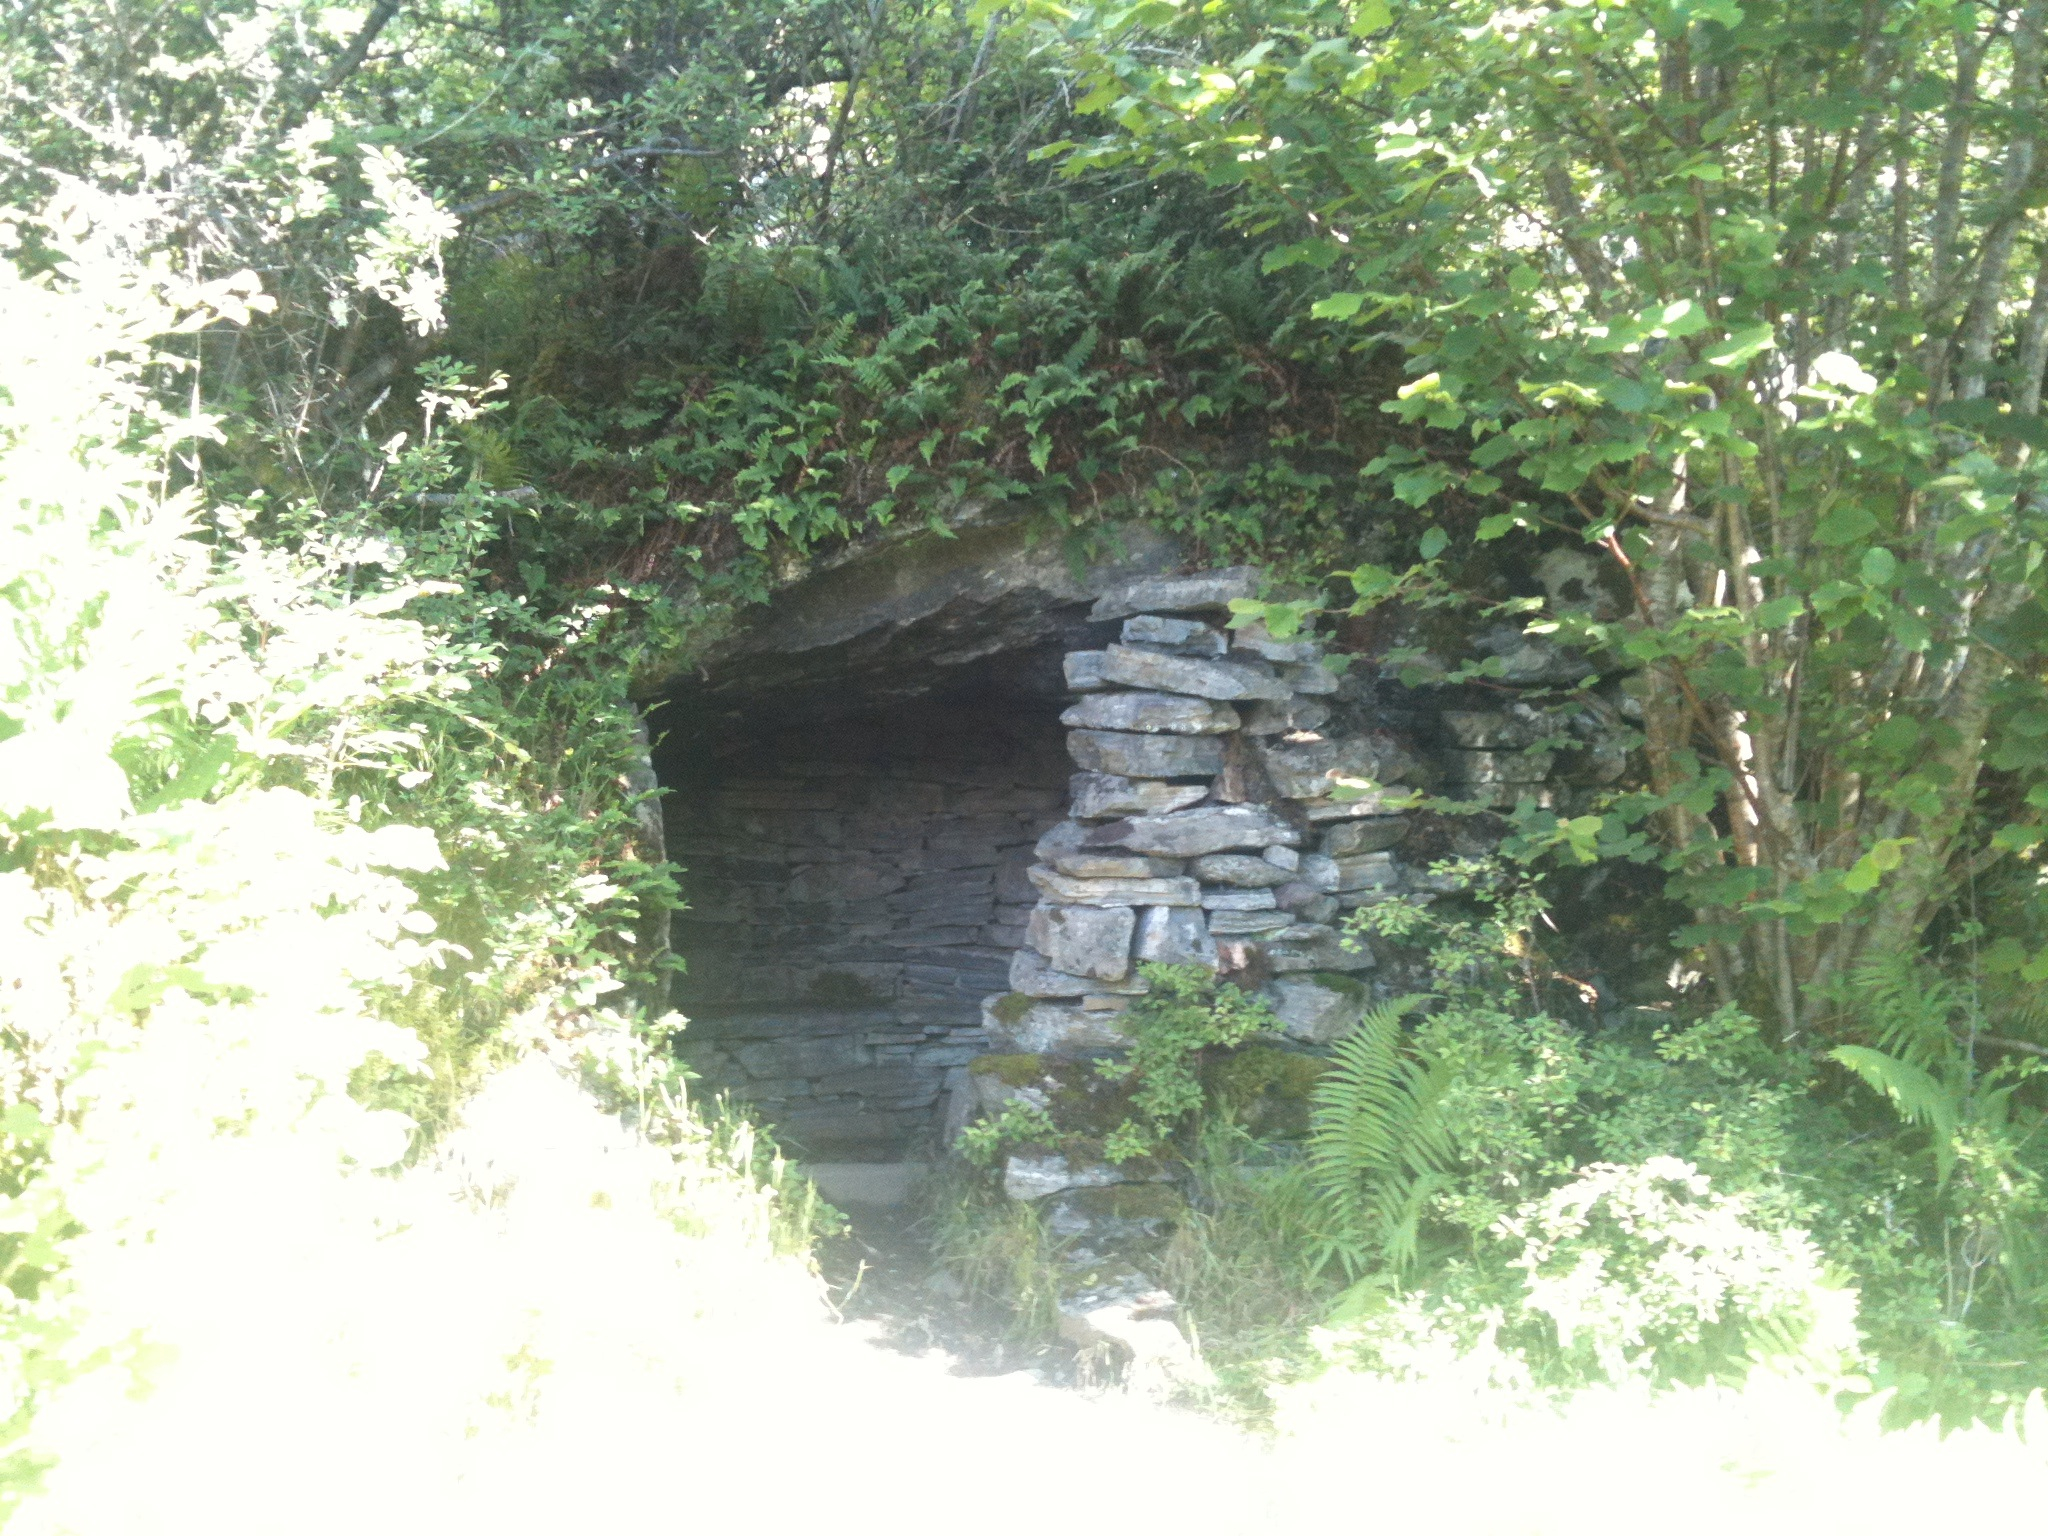 A stone cave on the forest path